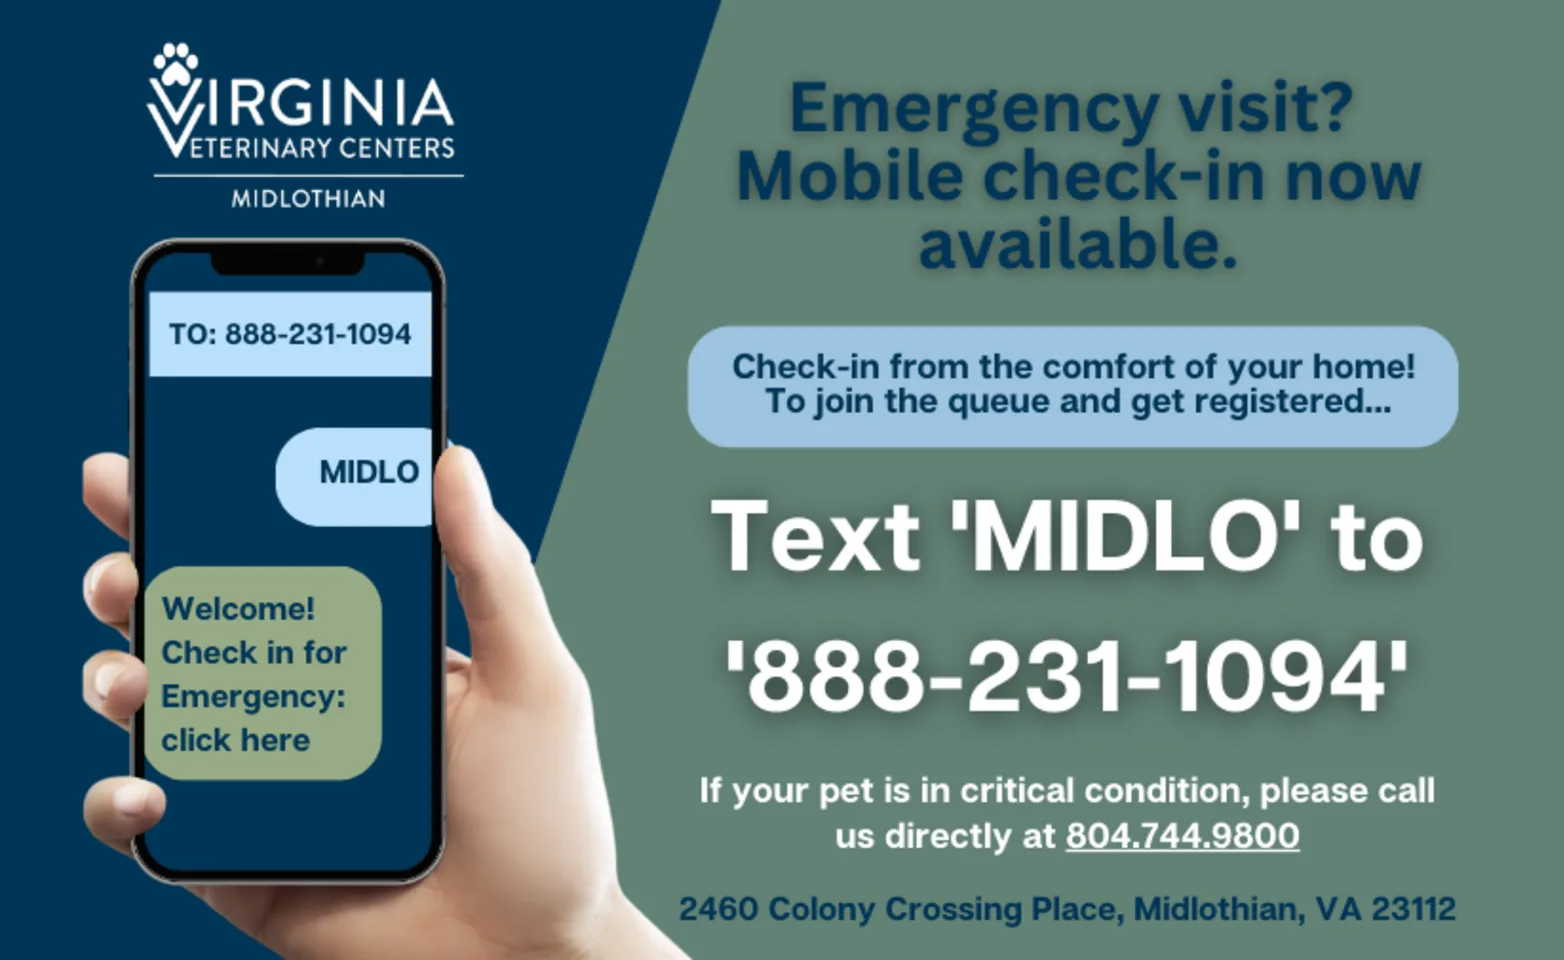 Emergency Visit? Mobile Check-in now available for VVC Midlothian! Check-in from the comfort of your home. 